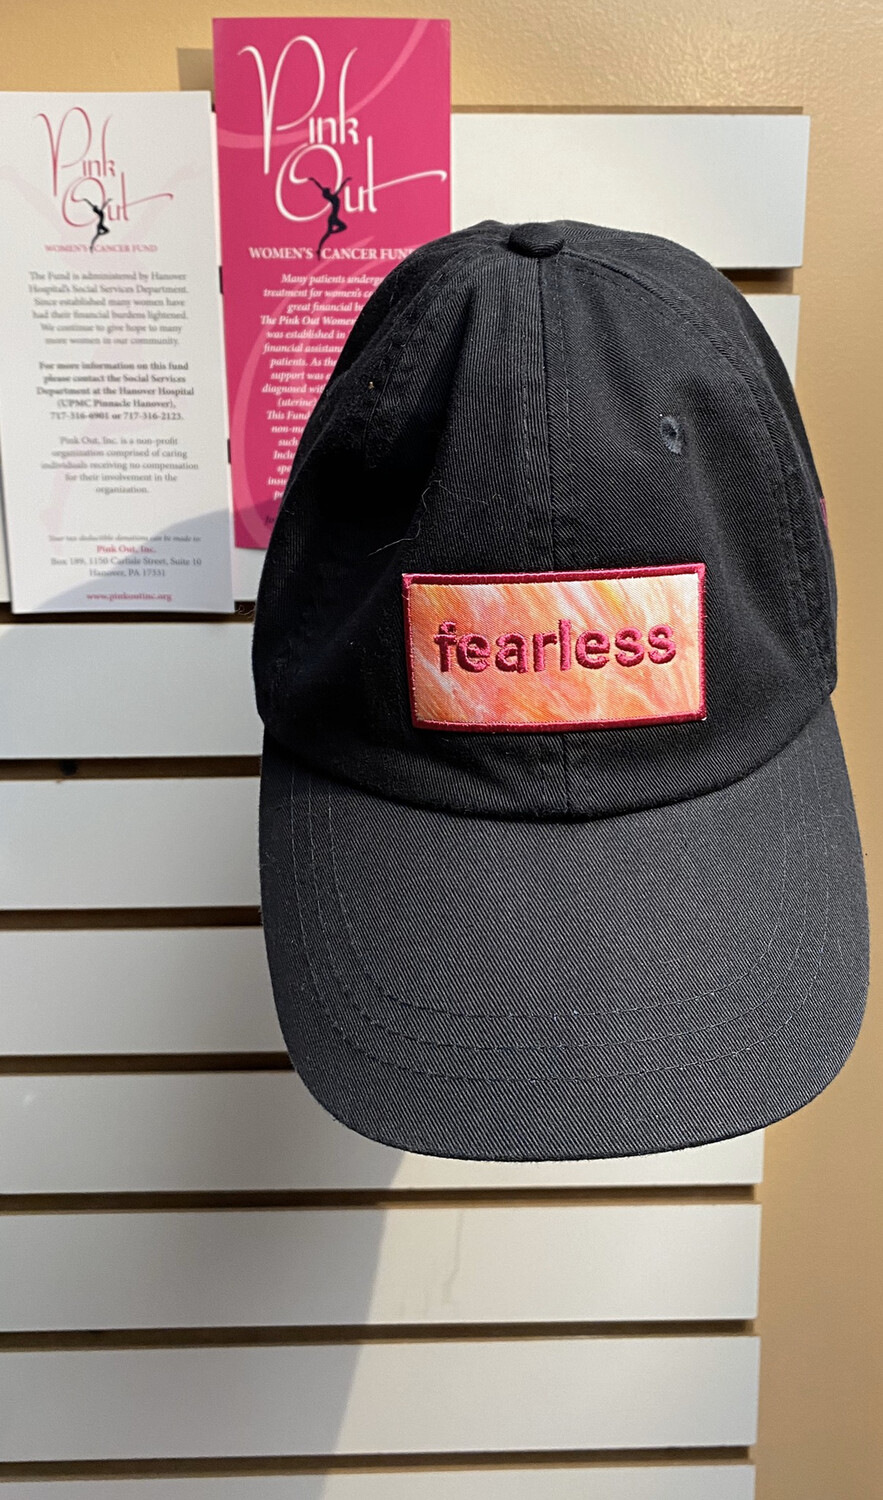 Fearless Black Cotton Cap 20% Donated To Pink Out